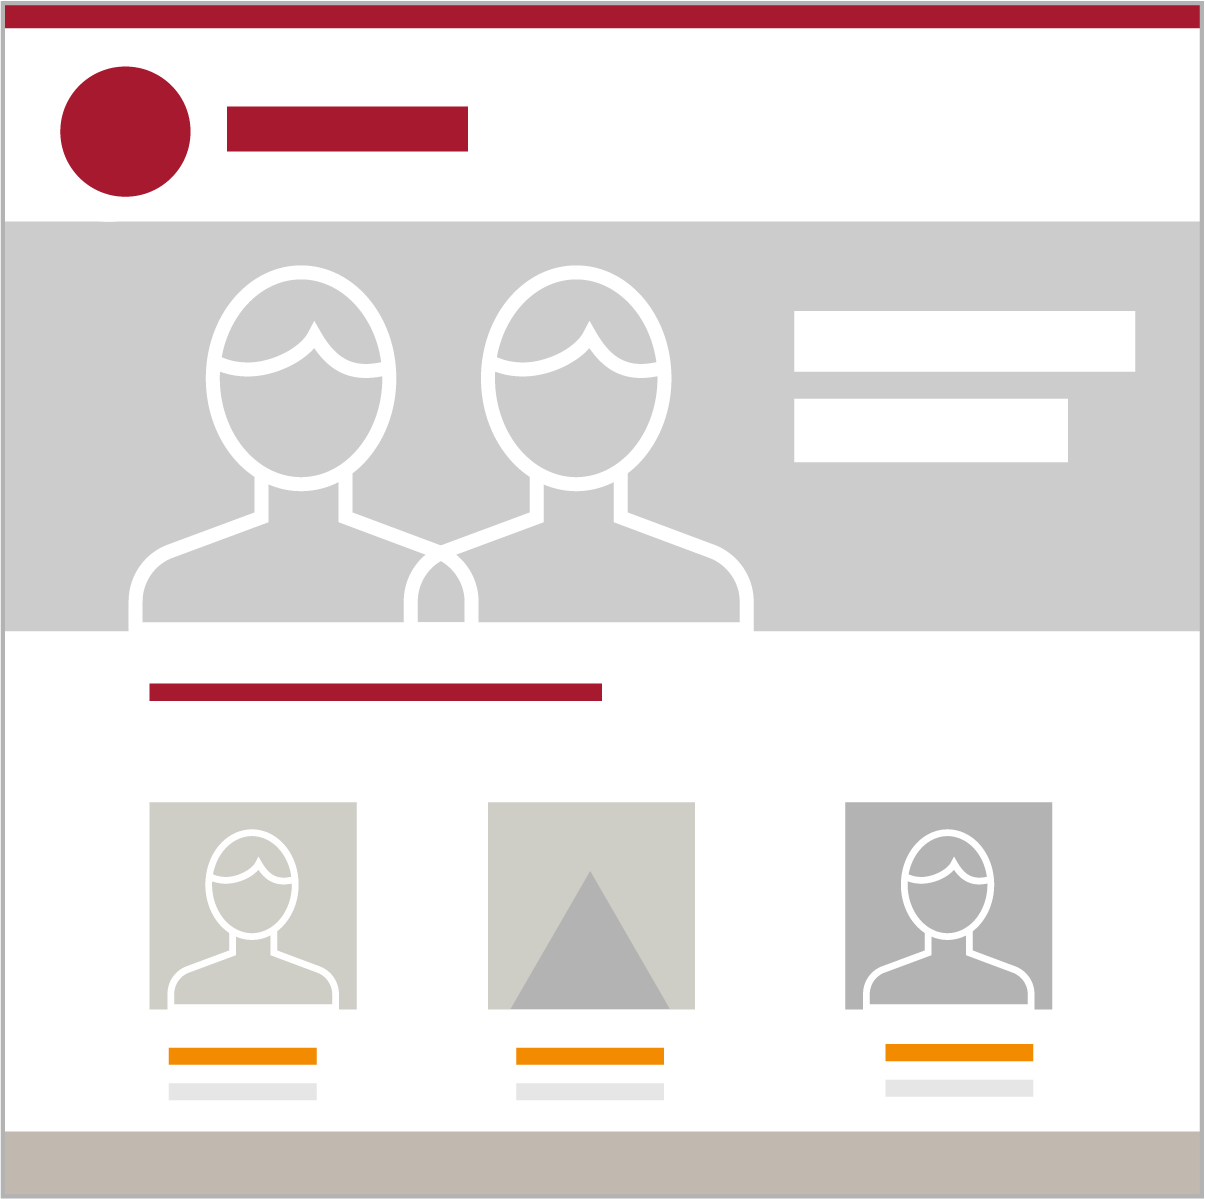 webpage design preview shows a thin red header followed by a red circle and red block for text adjusted left, followed by a light gray wide hero with cartoon drawing of two faces and two white blocks for header text, followed by a thin red line, then cartoon images of faces and a mountain in three columns, each with their own orange block and gray block of subheading text, followed by a gray footer.| Cornell